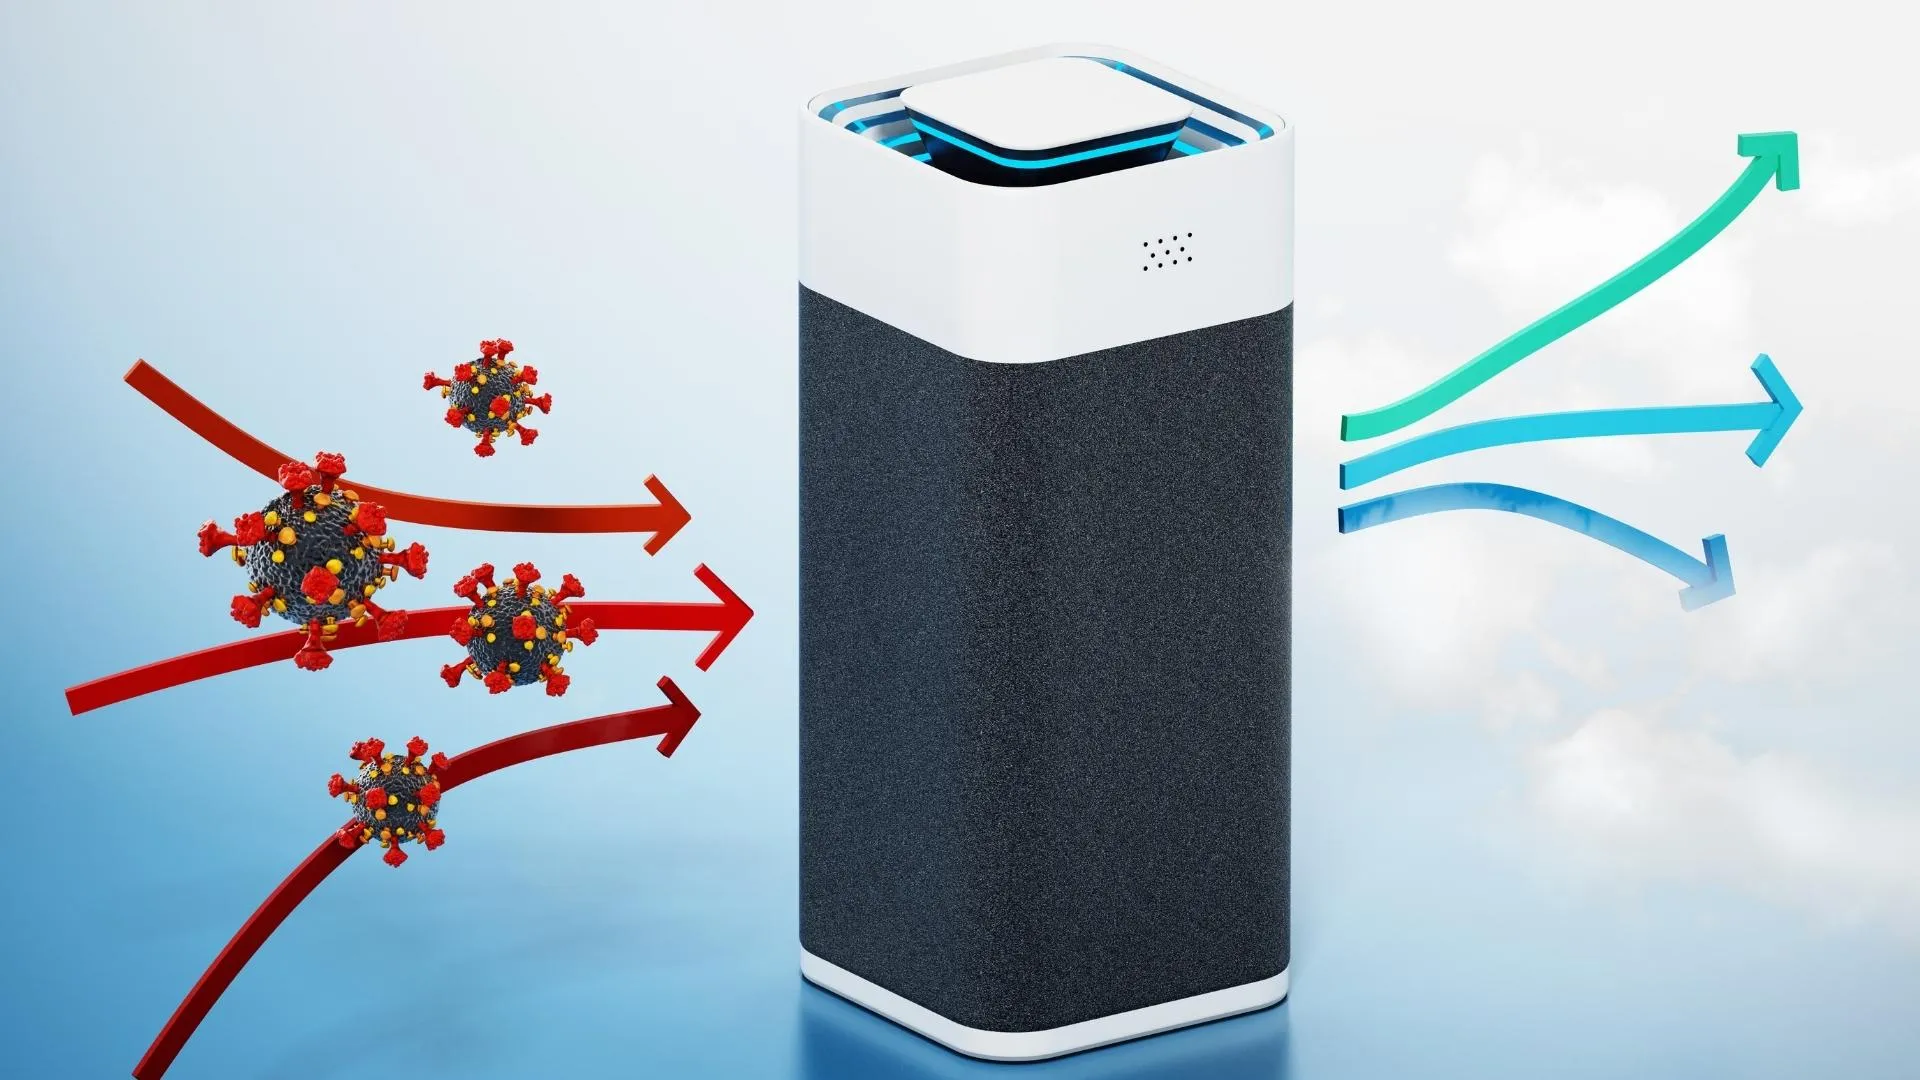 Portable Air Cleaner - Can It Protect You From Viruses Like COVID?